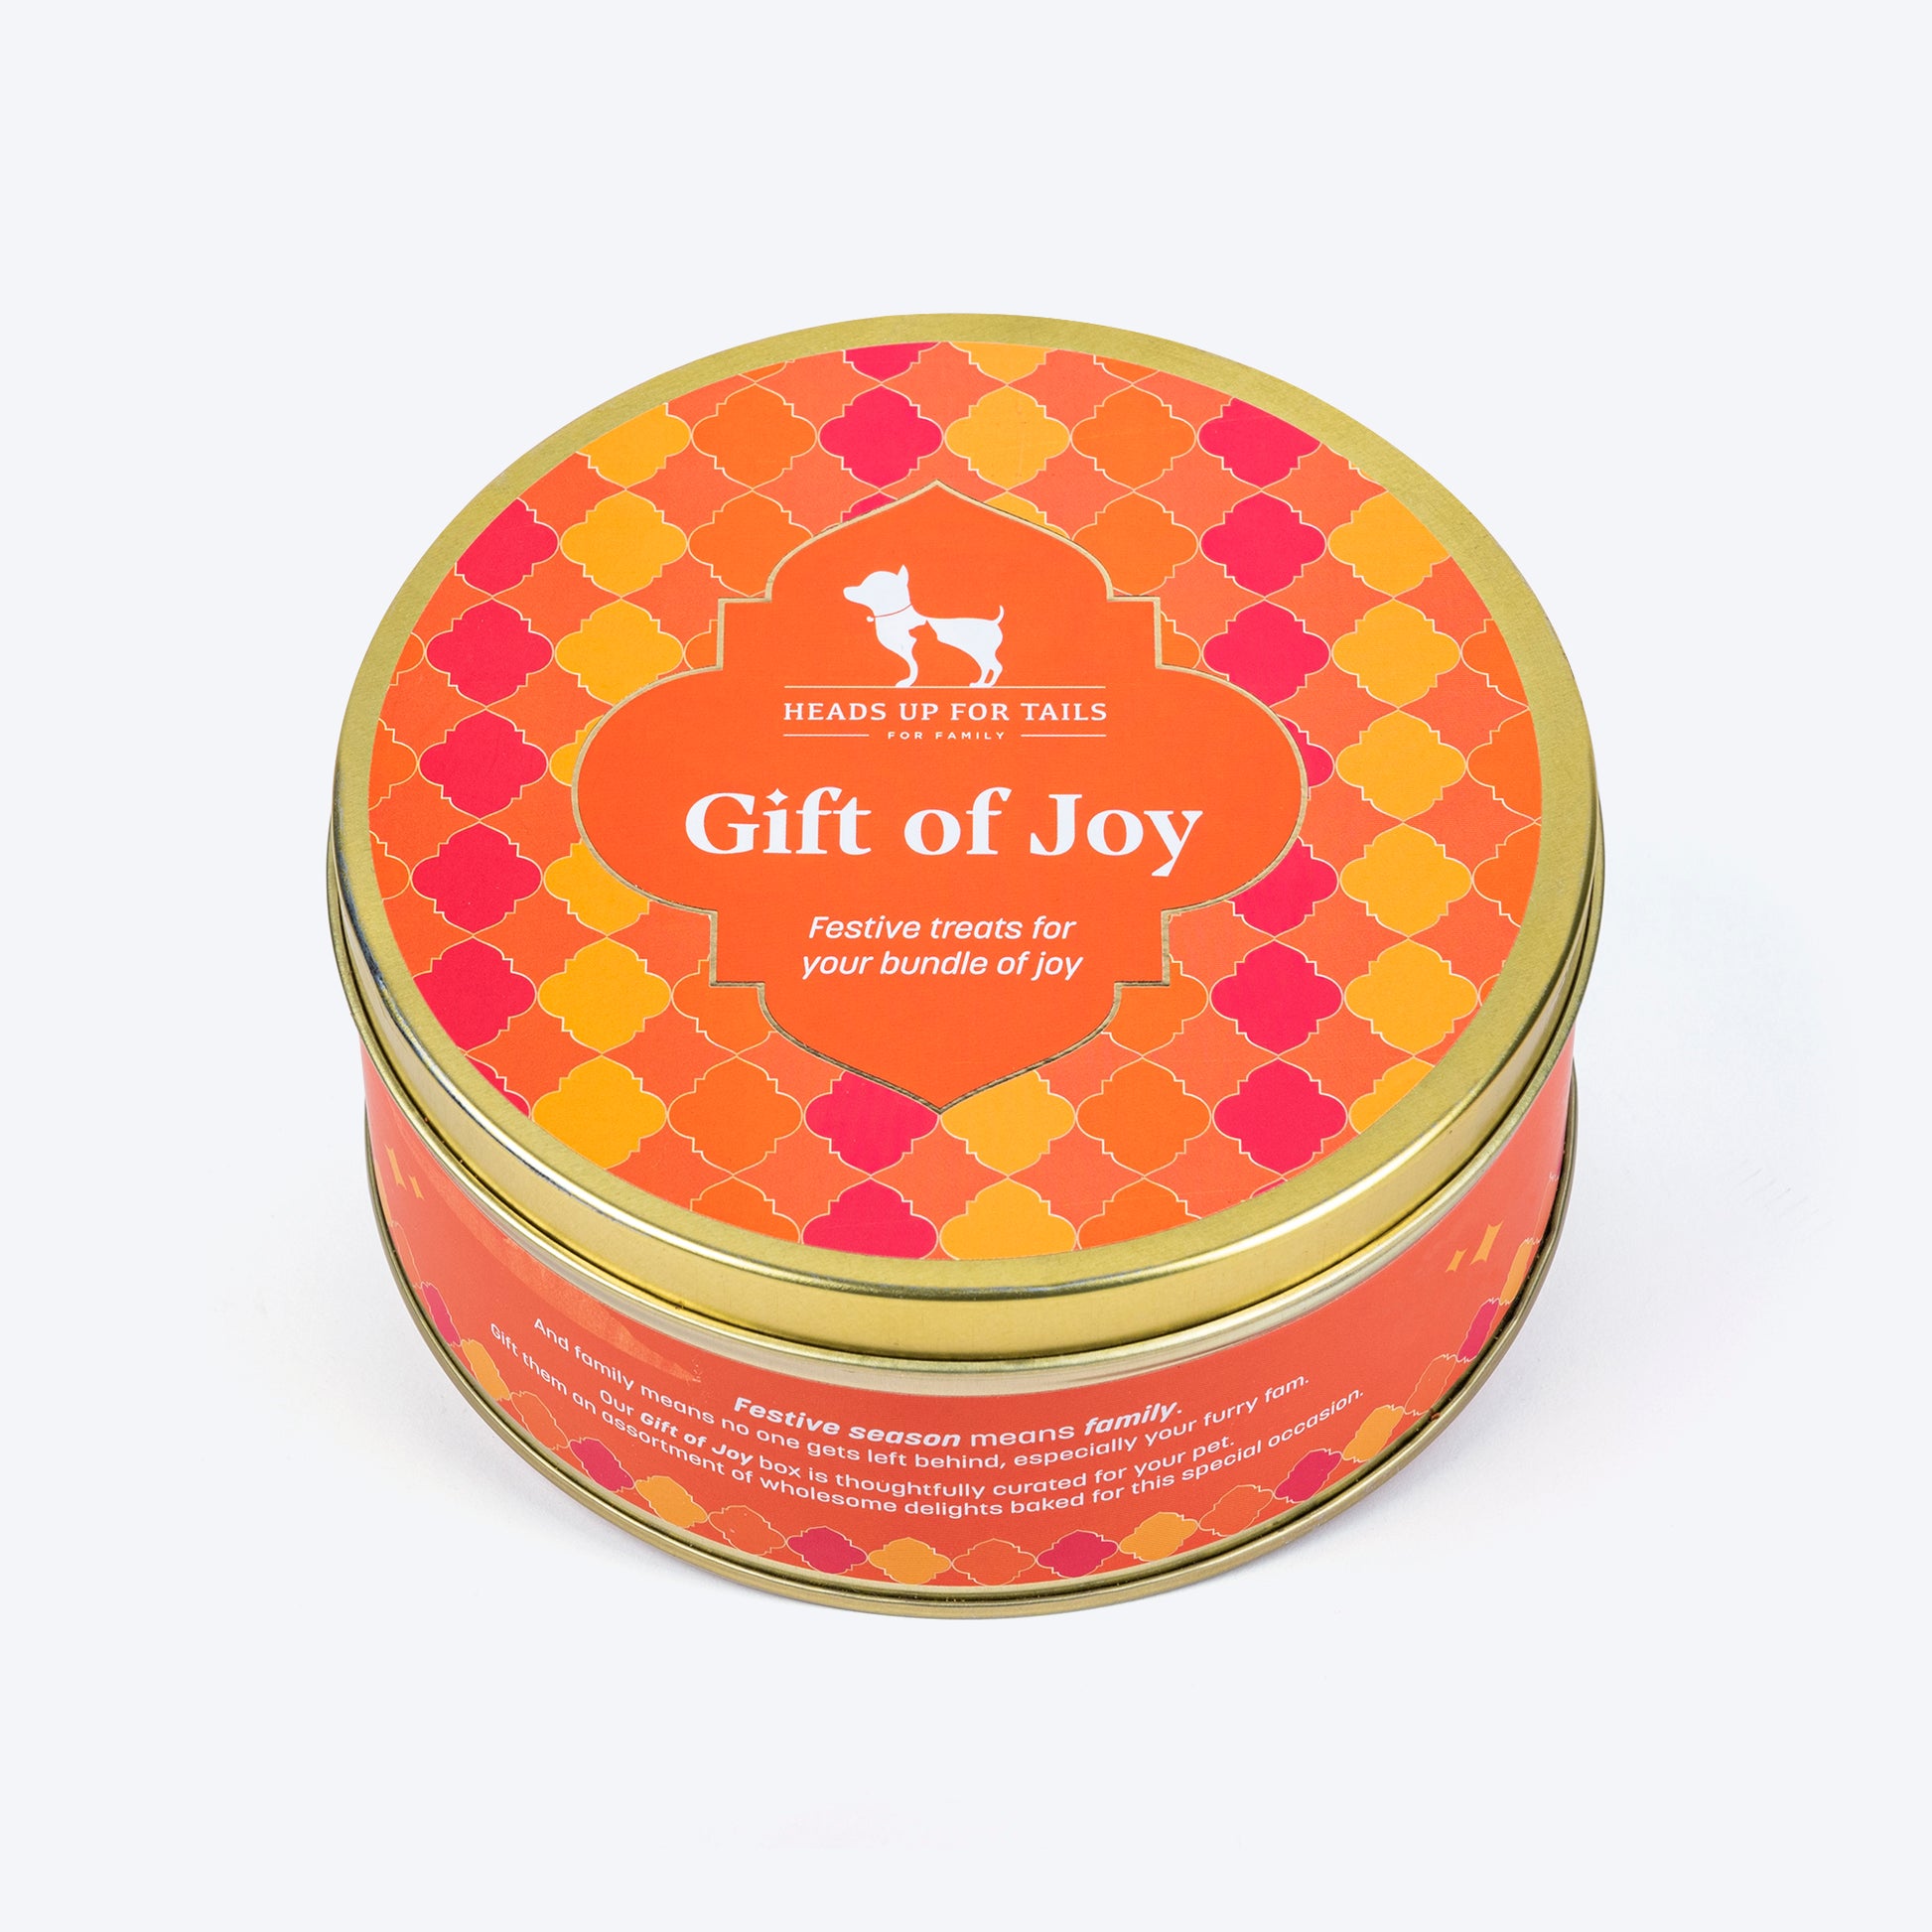 HUFT Diwali Gift of Joy Box For Dogs - Heads Up For Tails